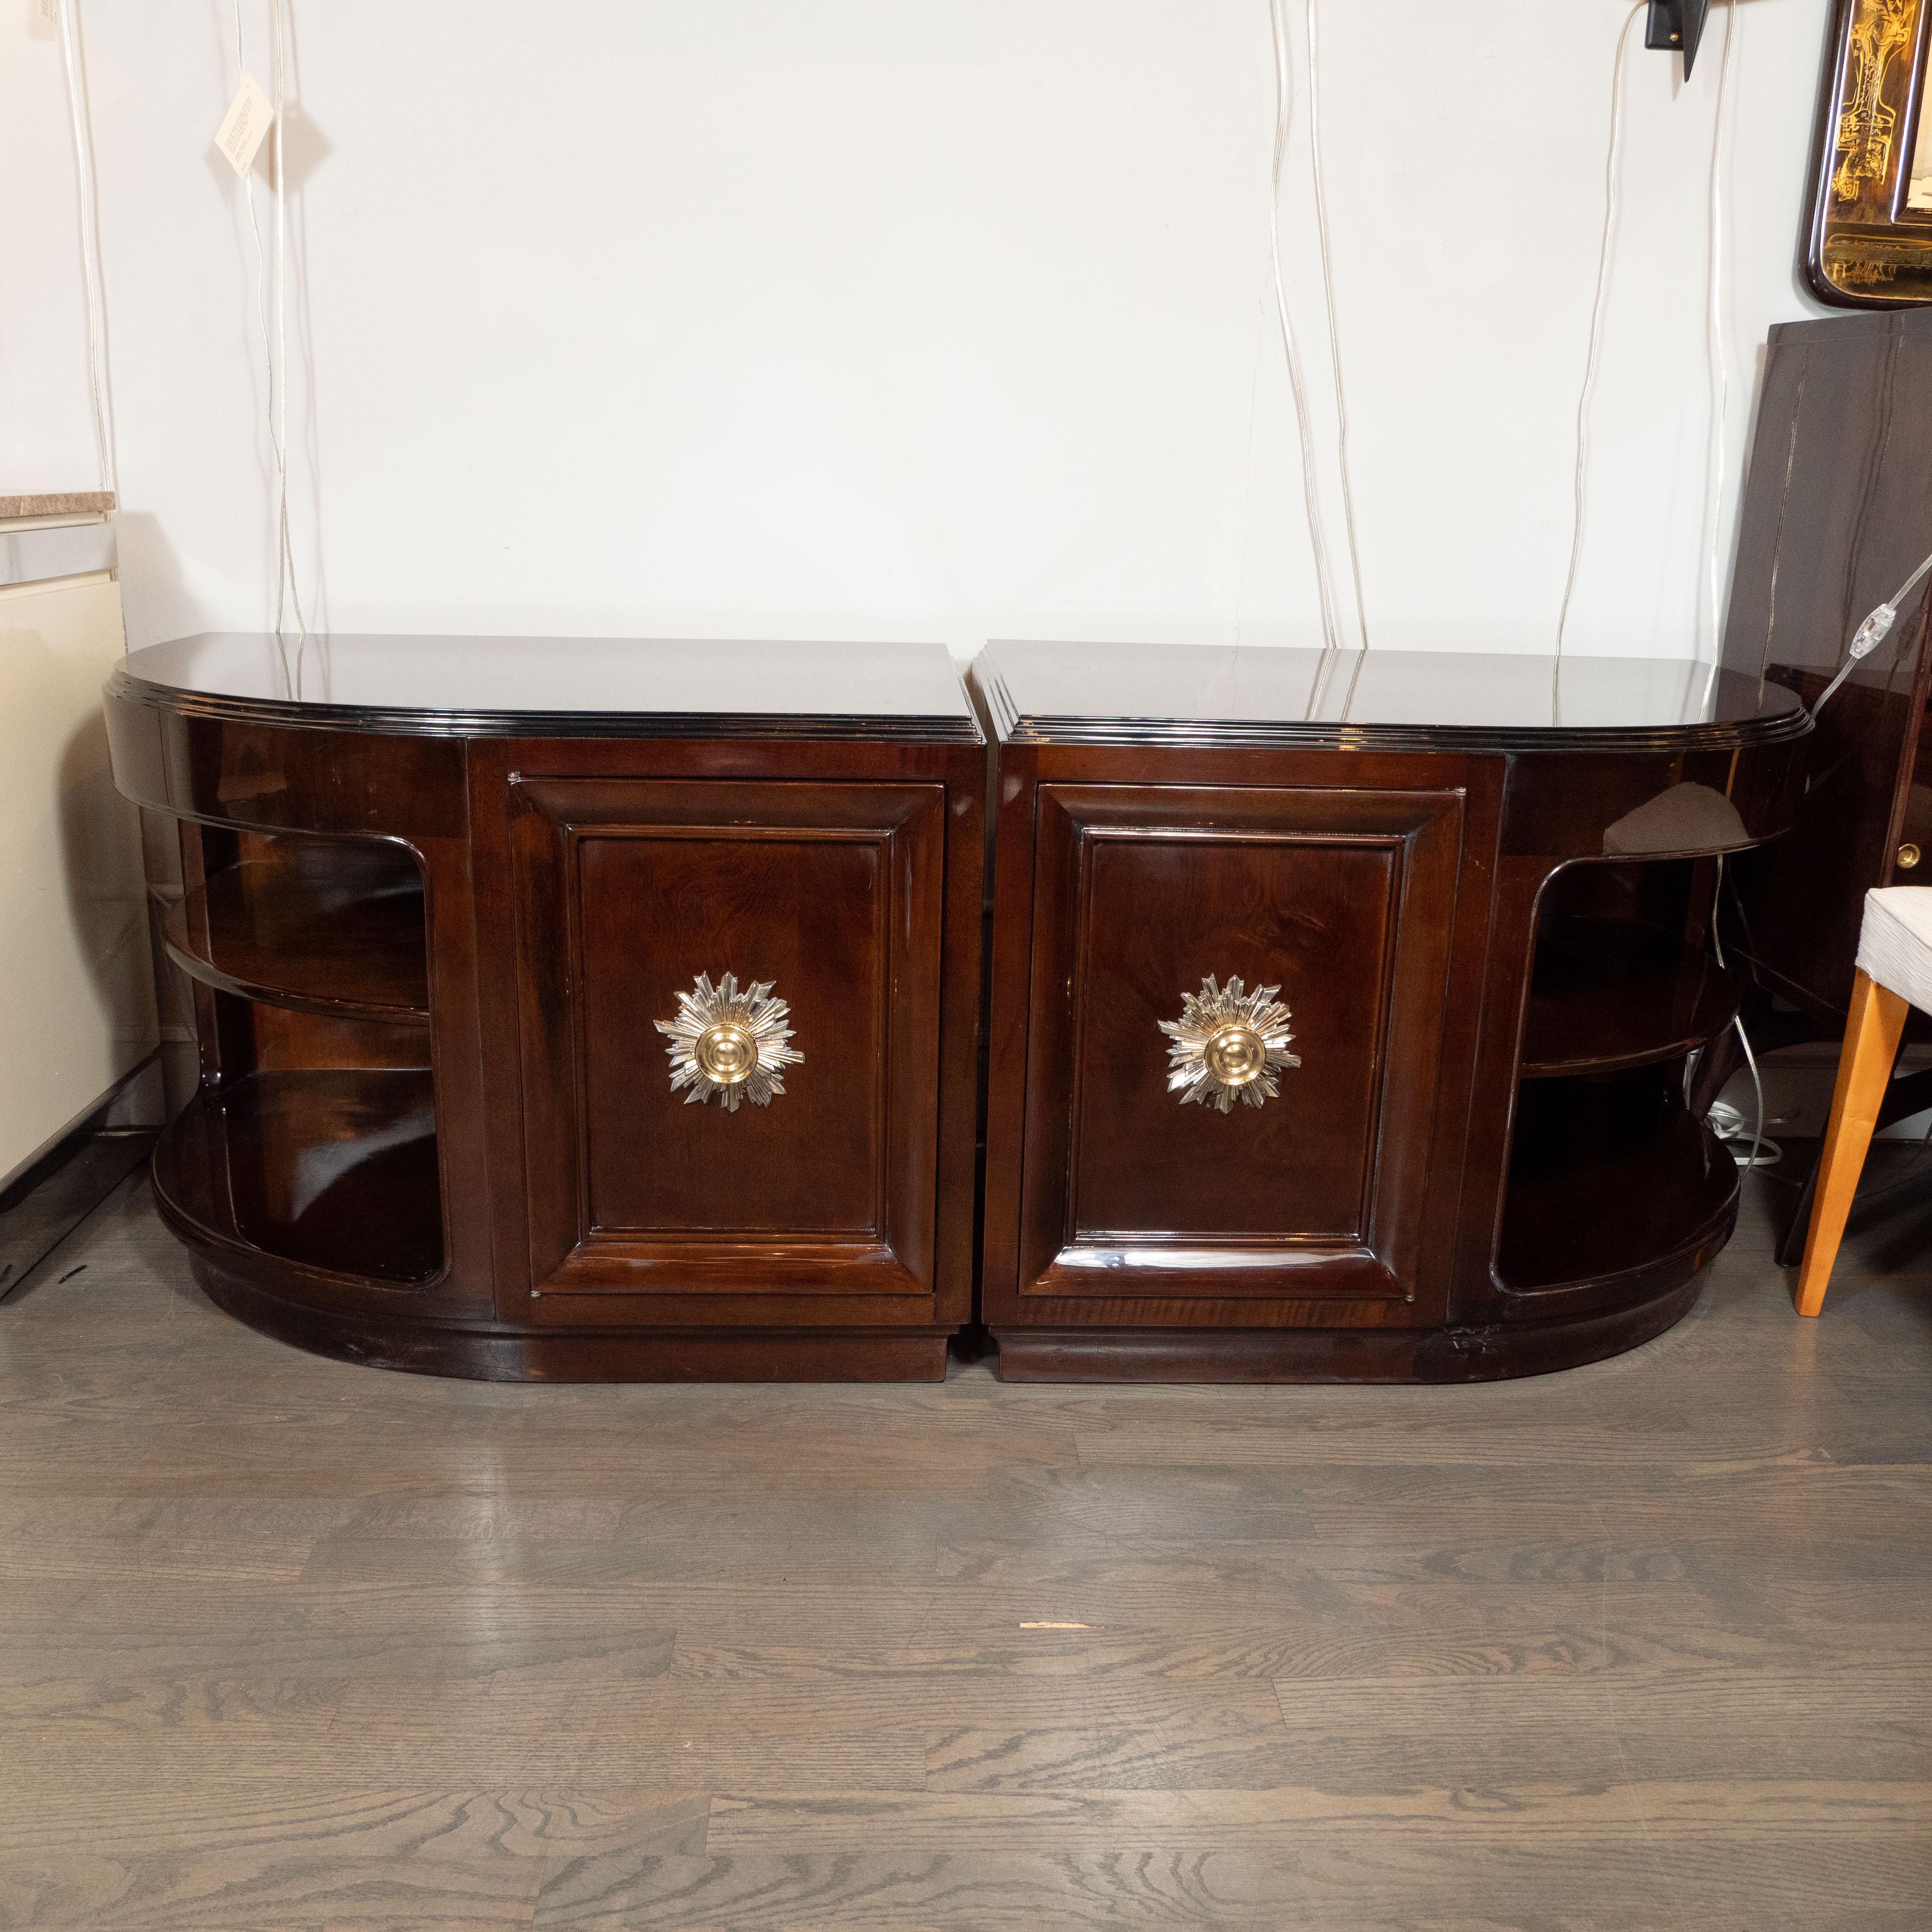 This stunning pair of Art Deco bookmatched walnut end tables/ nightstands were realized by the esteemed maker Grosfeld House by Lorin Jackson circa 1945. They feature streamlined fronts with beveled skyscraper style detailing in black lacquer